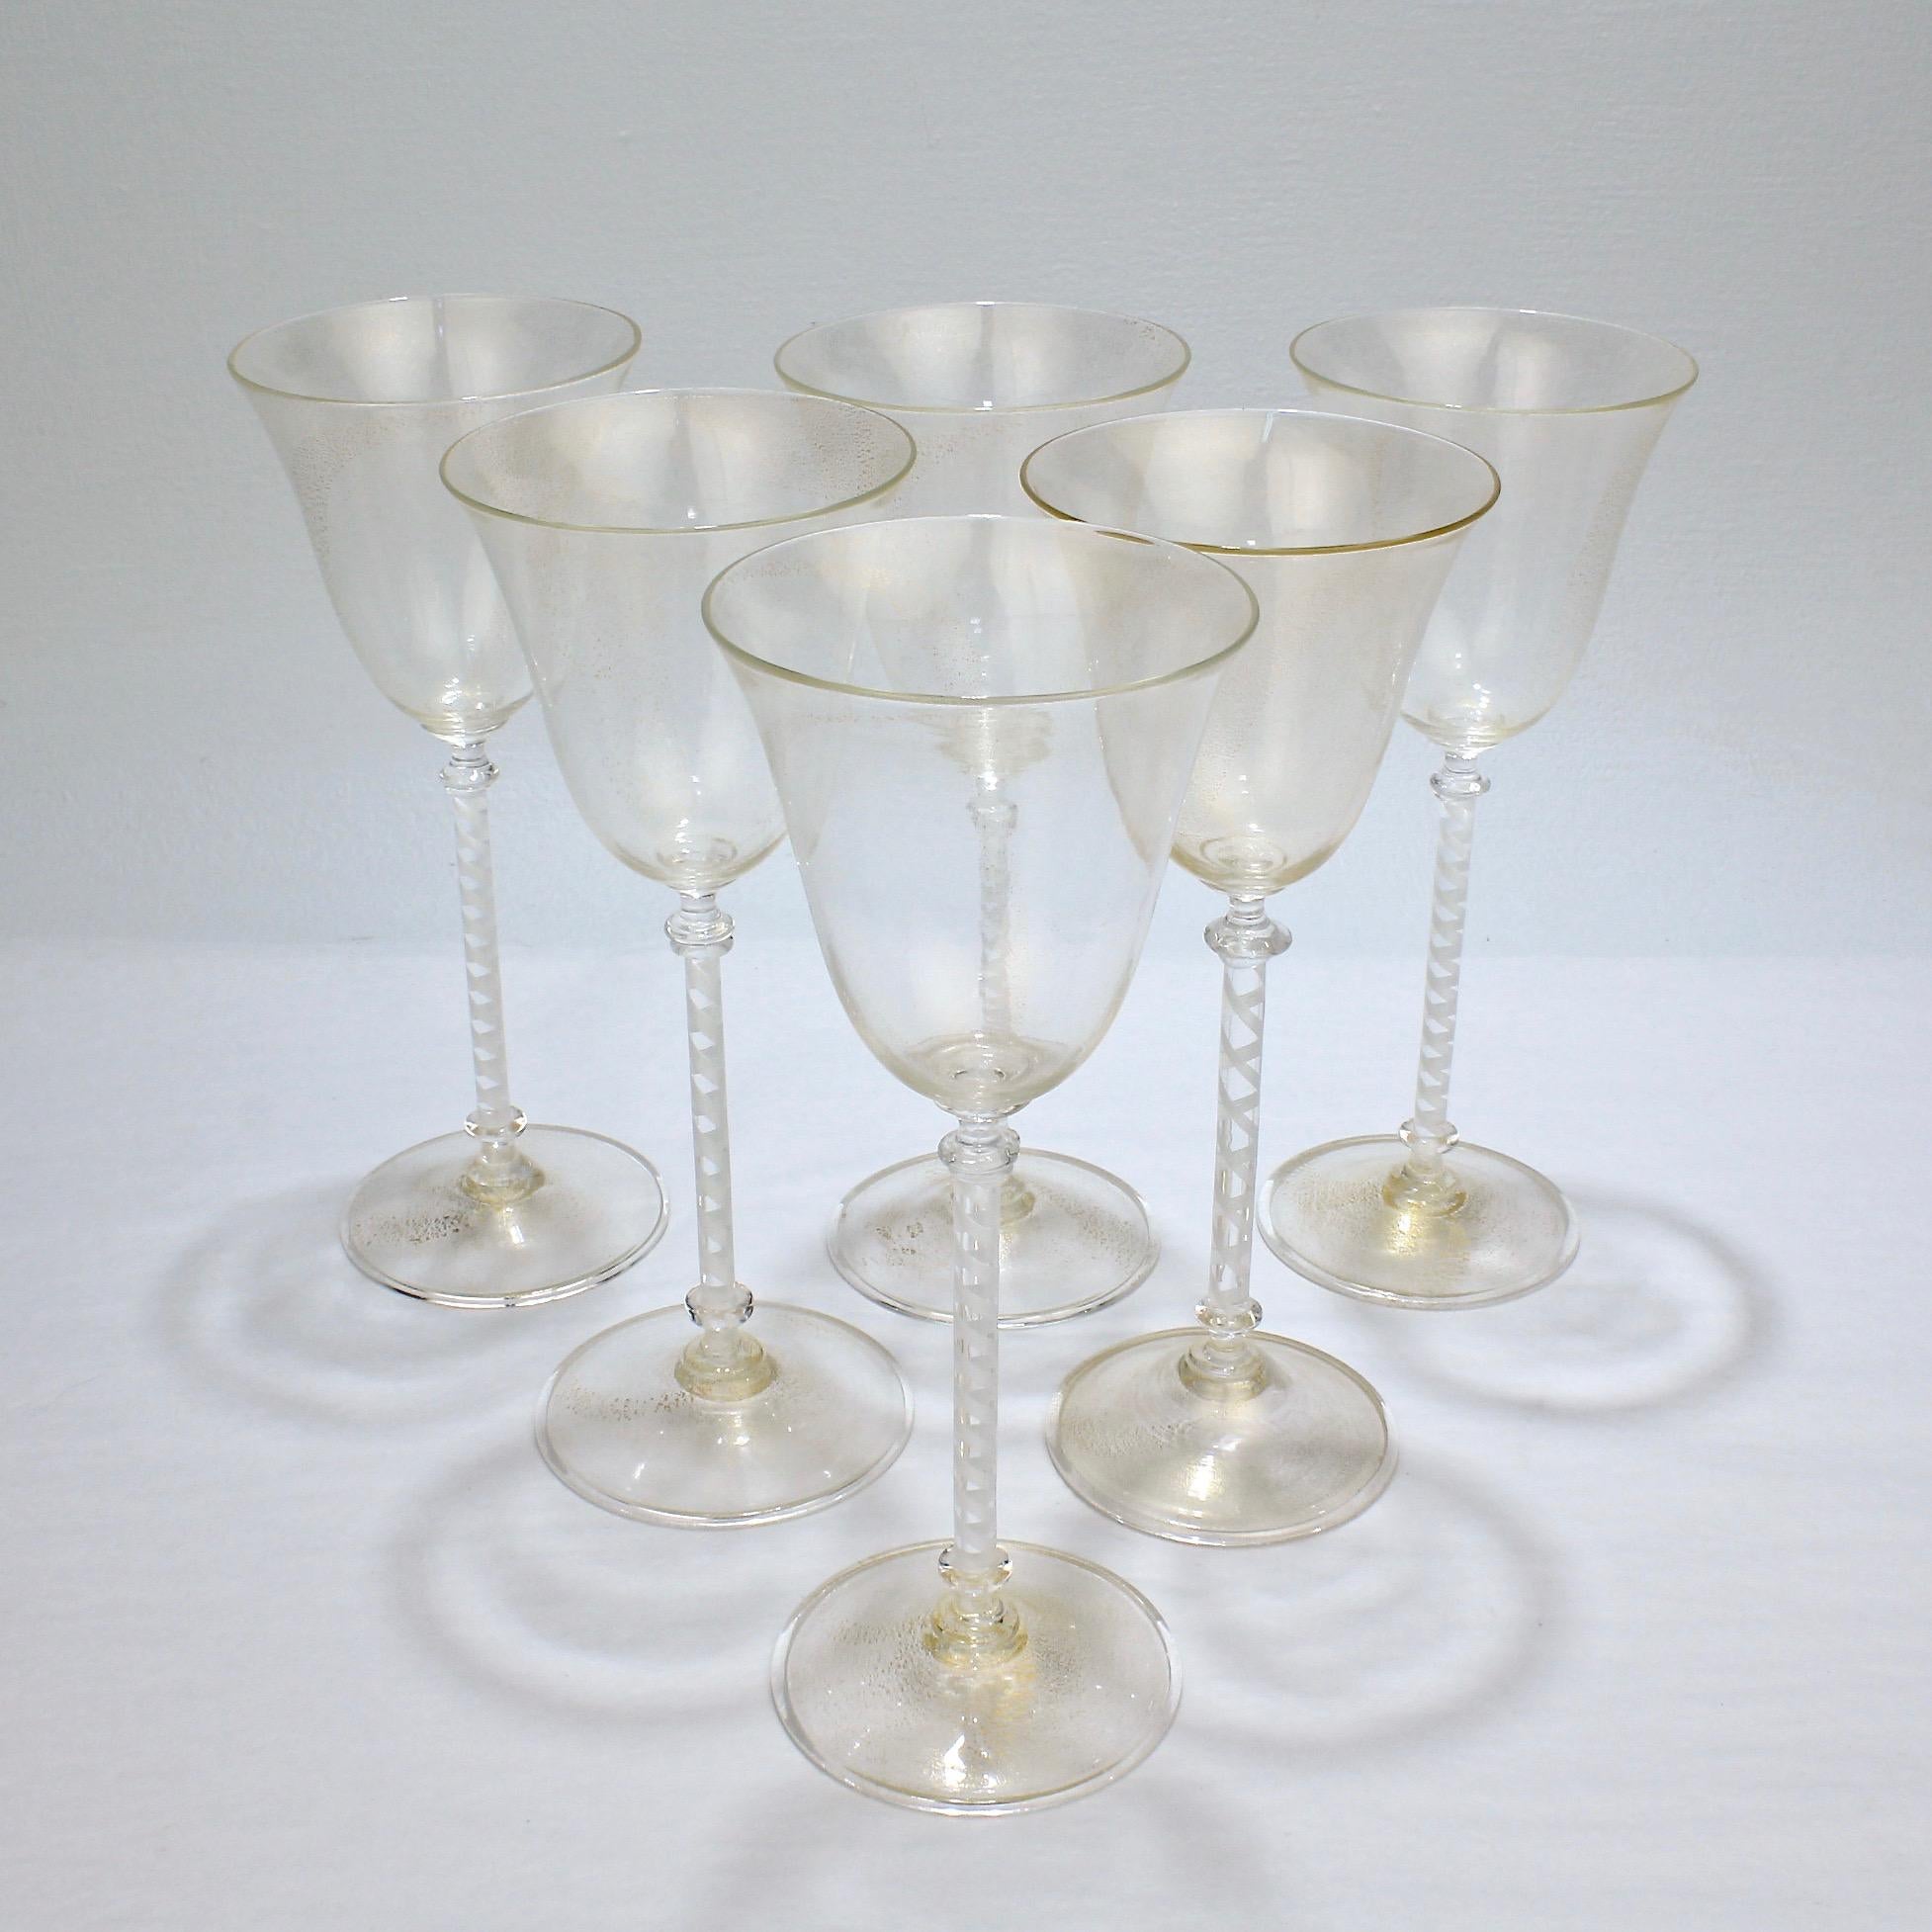 Italian Set of 6 Vintage Venetian Wine Goblets with White Twist Stems & Gold Inclusions